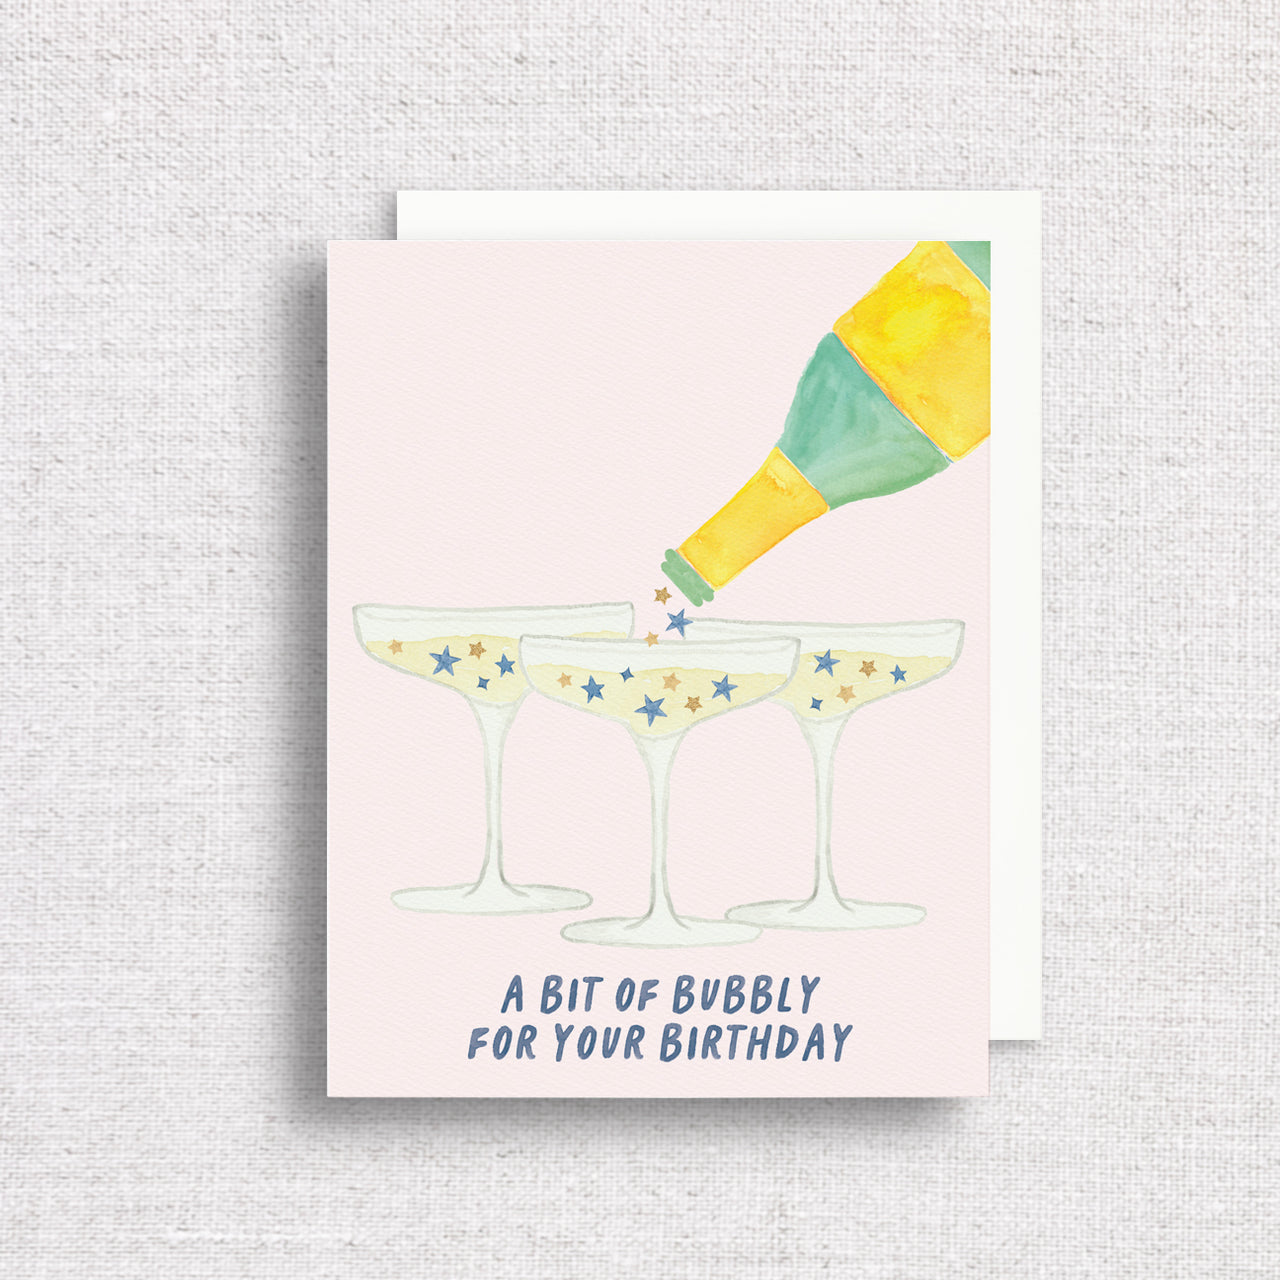 'A bit of bubbly for your birthday' Greeting Card by Gert & Co